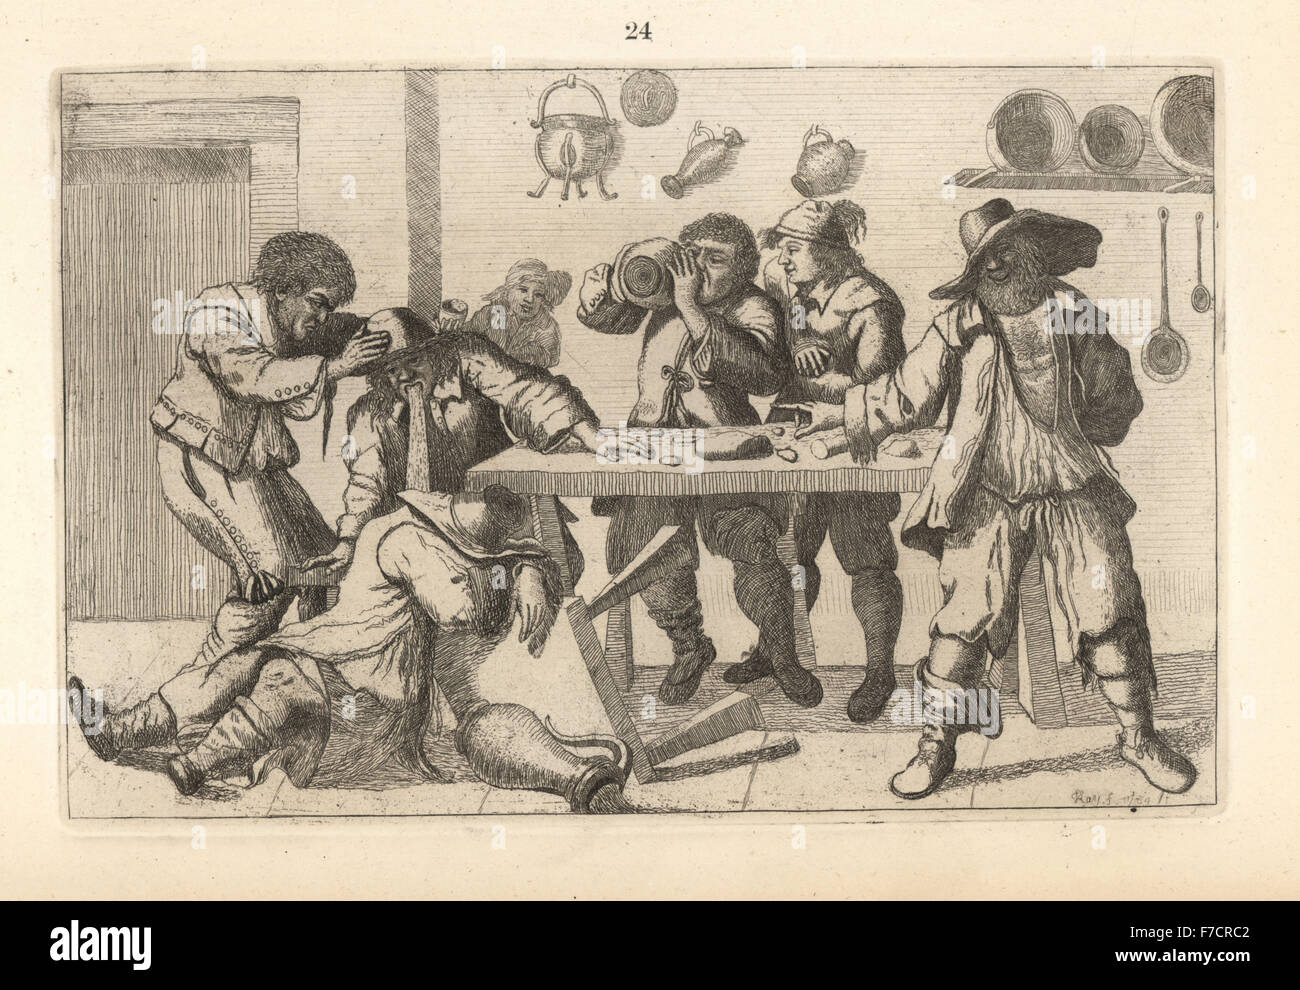 Beggars' Feast, after Adriaen van Ostade. Copperplate engraving by John Kay from A Series of Original Portraits and Caricature Etchings, Hugh Paton, Edinburgh, 1842. Stock Photo